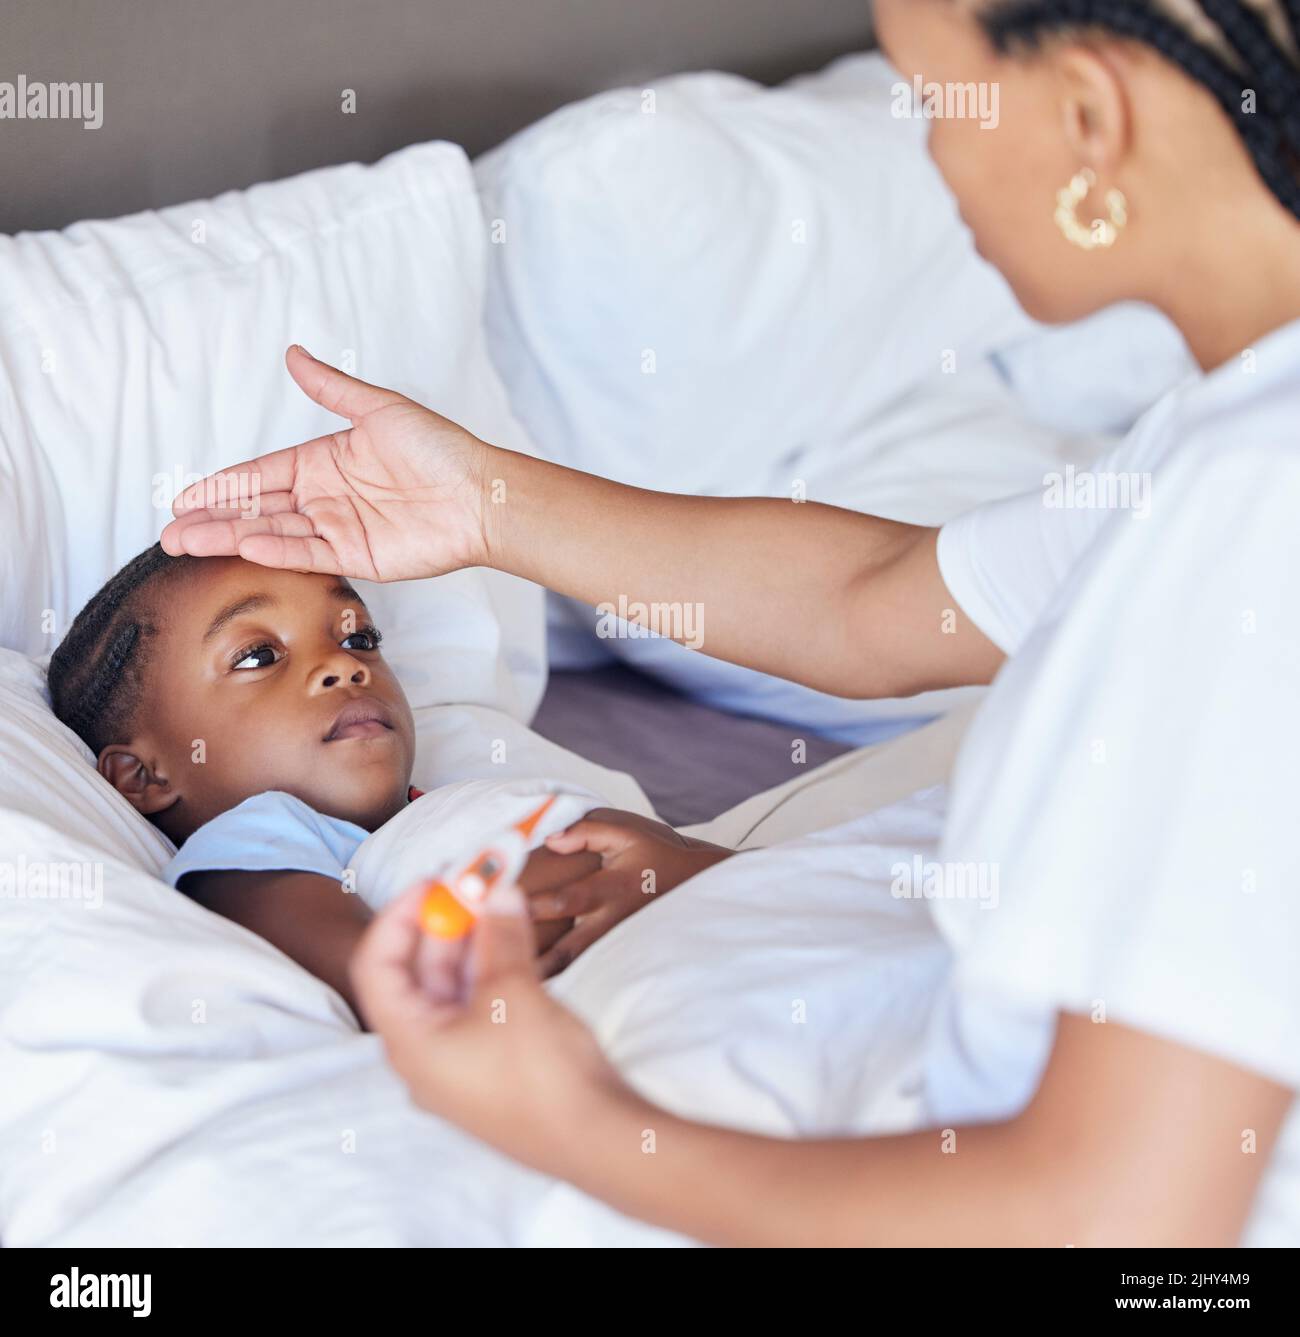 Sick little girl in bed while her mother uses a thermometer to check her temperature. Black single parent feeling daughters forehead. African American Stock Photo